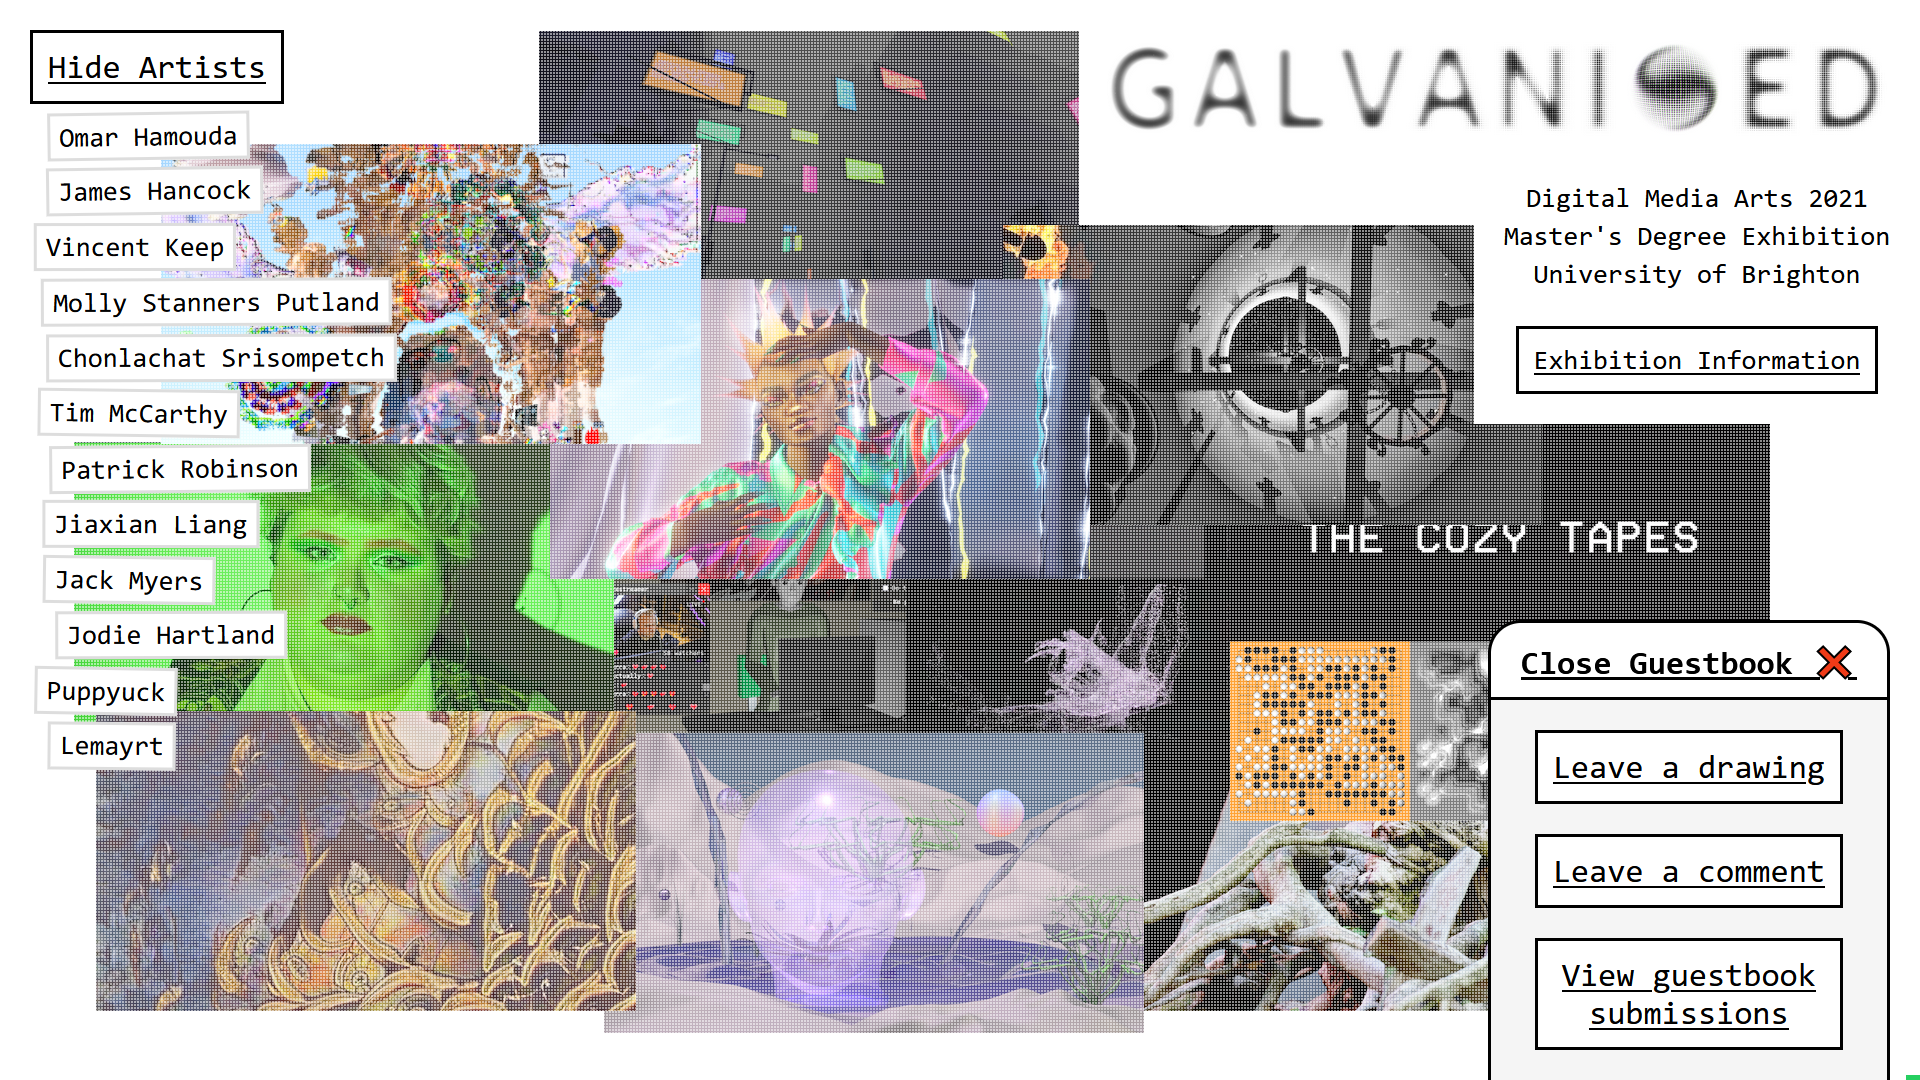 A screenshot of a collage of pictures, the homepage of galvanised dot show